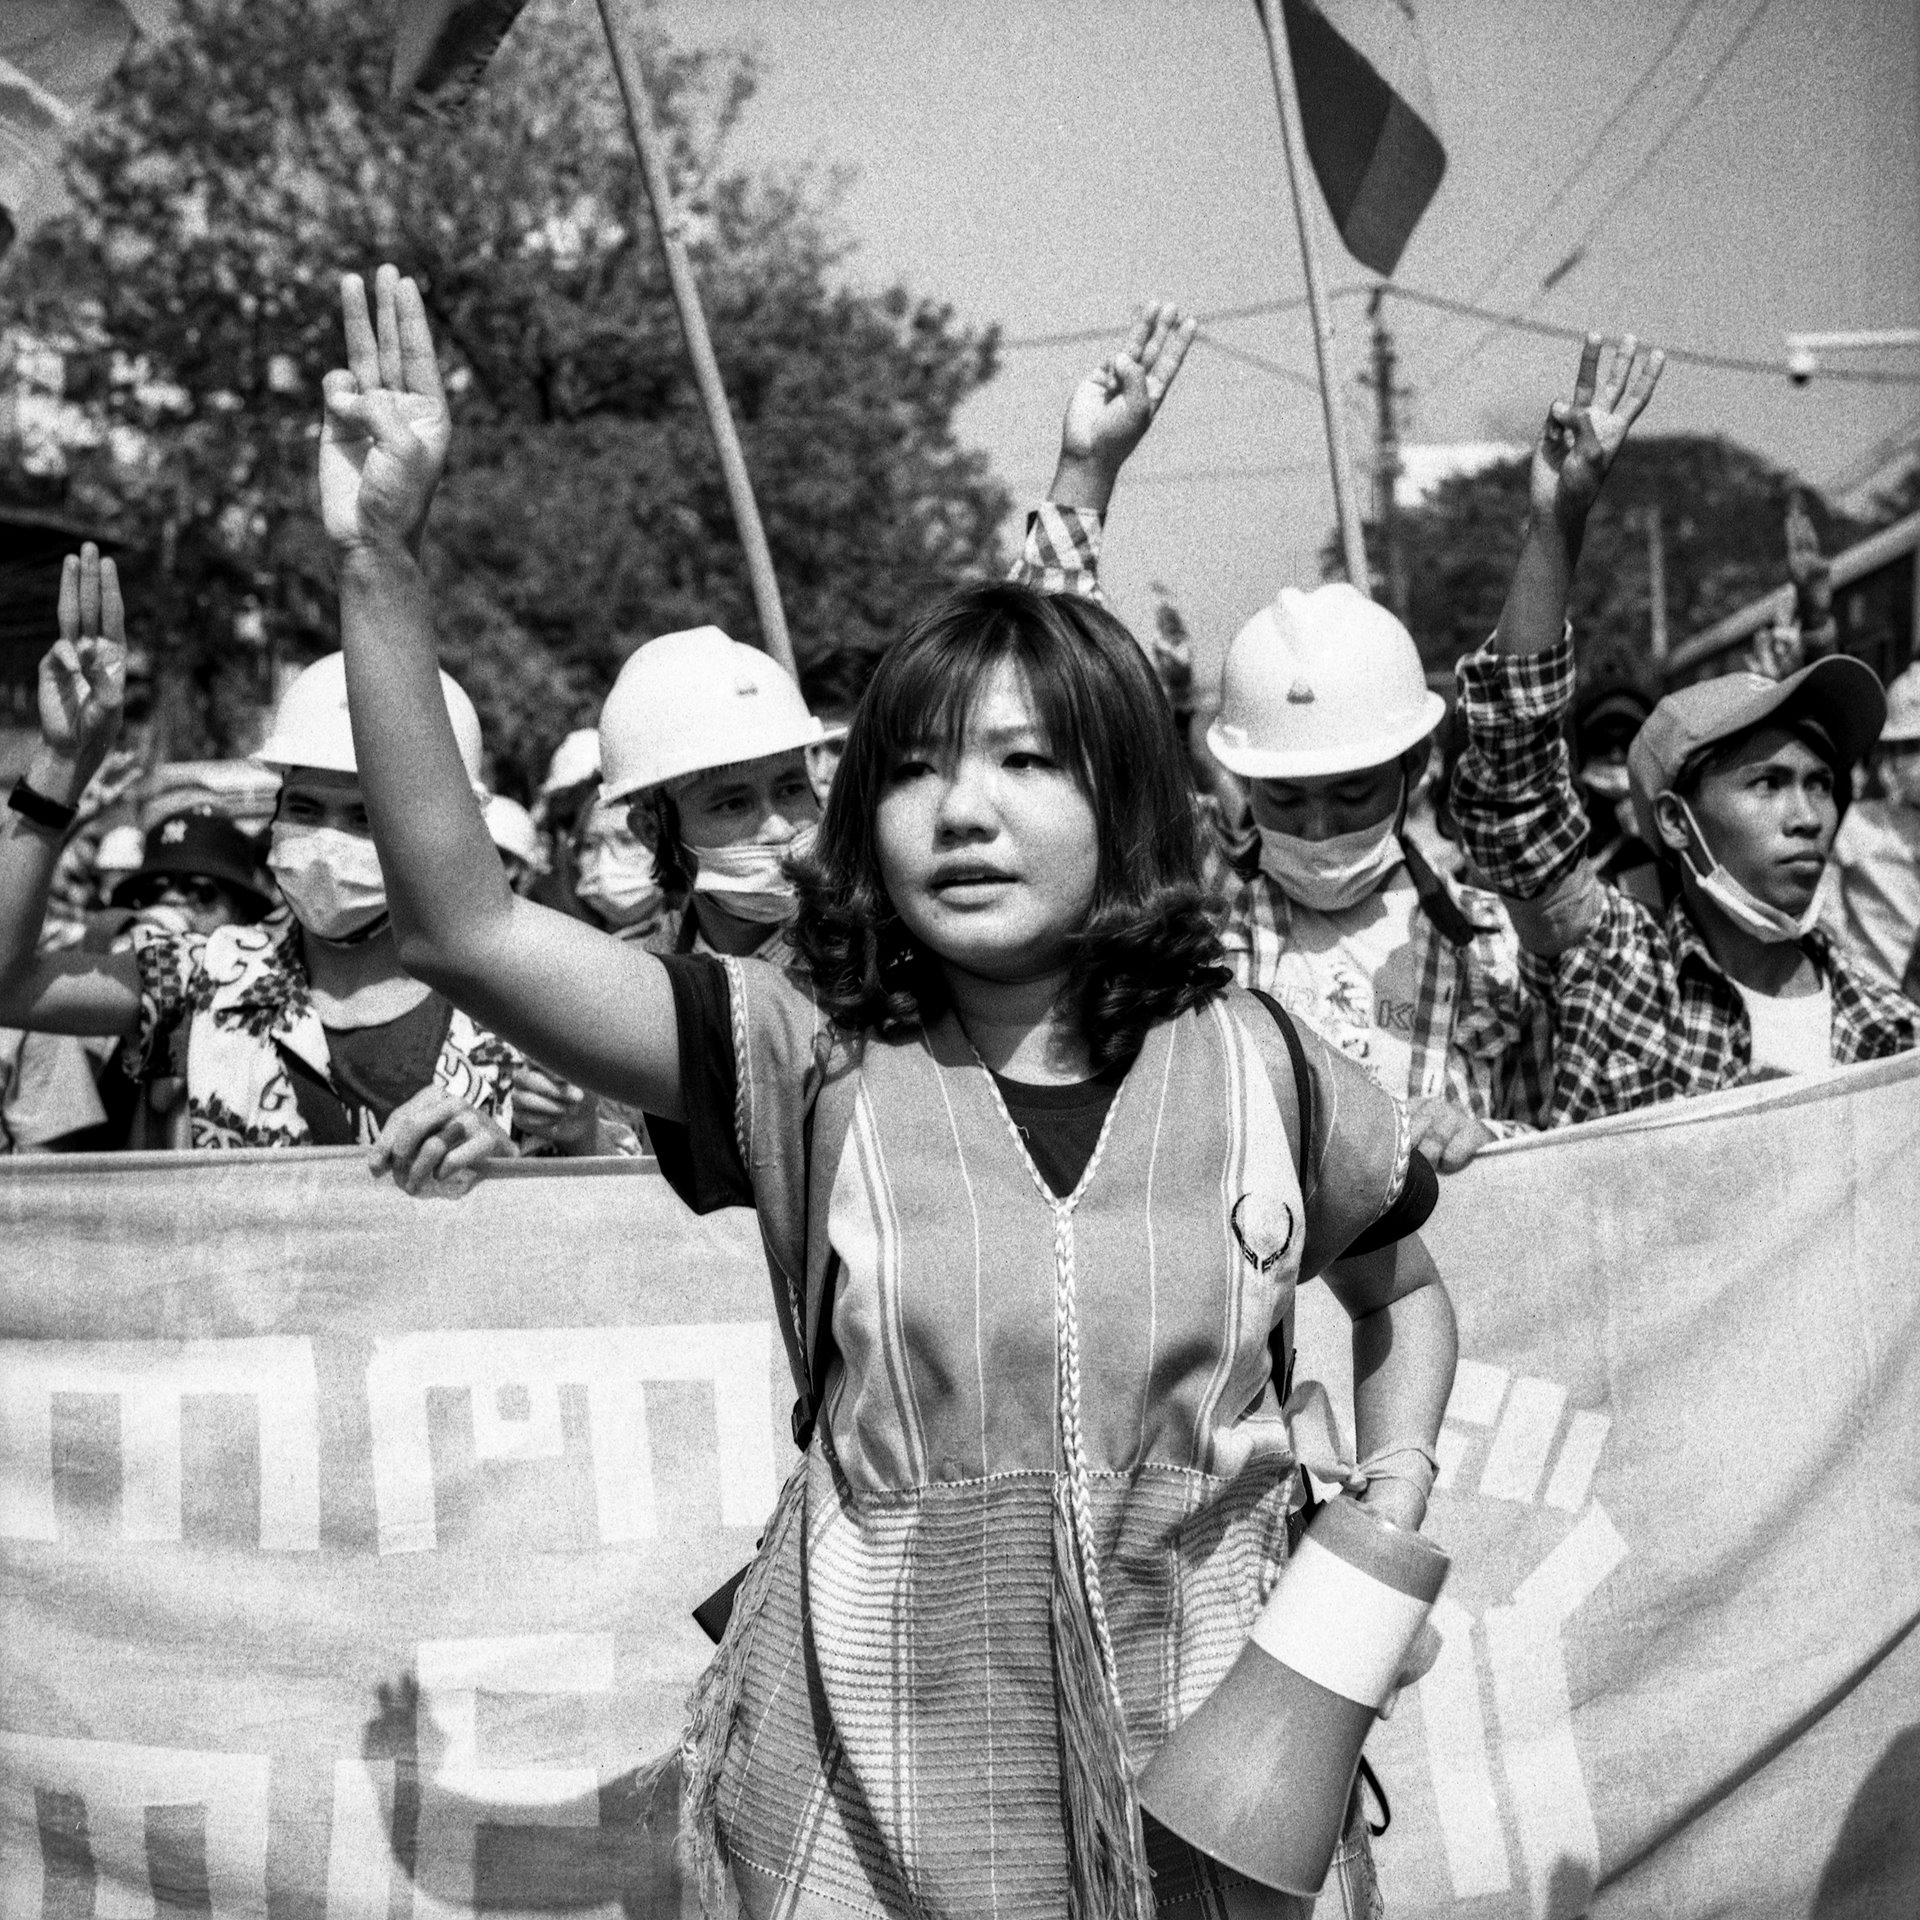 Ei Thinzar Maung, a political ac​tivist, is seen protesting alon​g with a labor union in Yangon, Myanmar. Maung later joined the parallel Myanmar government in exile, and was mentioned in the TIME Top 100 most influential people of 2021 list.